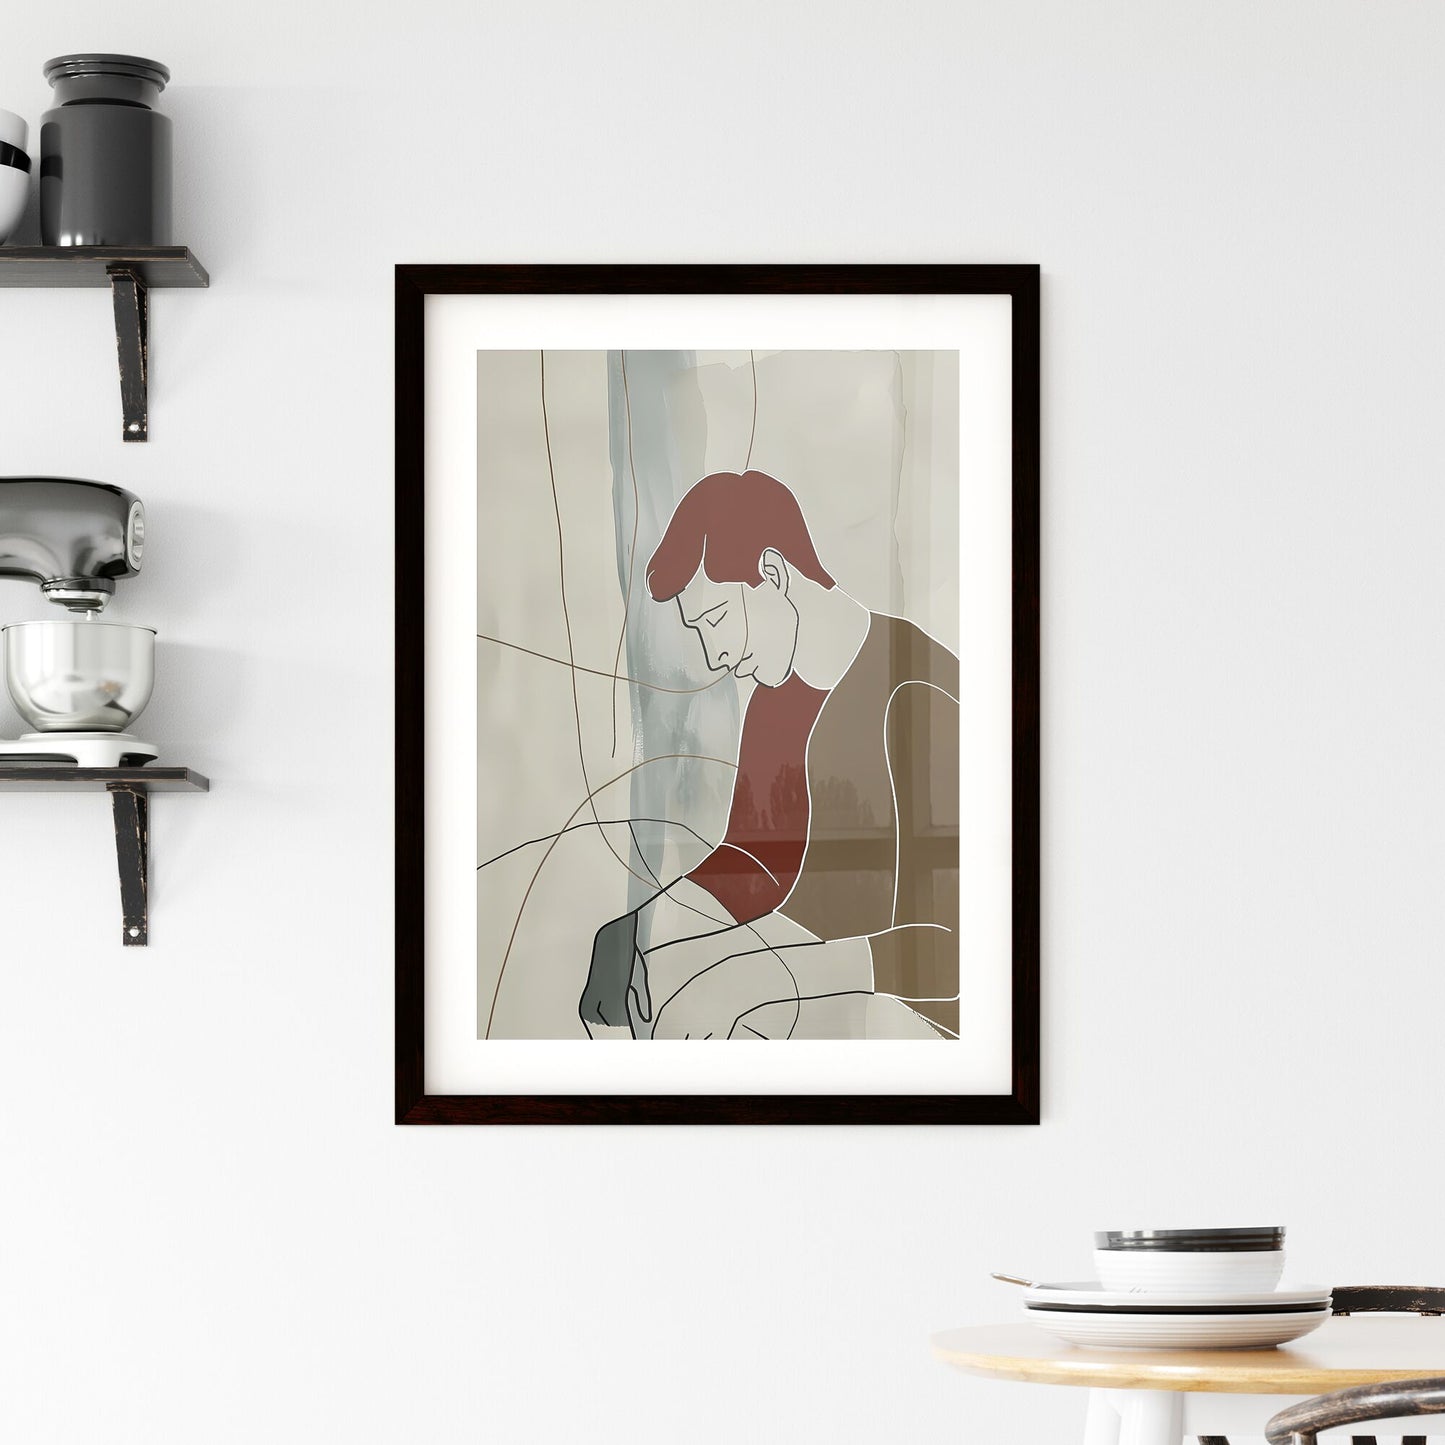 Vibrant Gouache Painting on Paper: Minimalist Line Art of a Sitting Man with Muted Color Palette and Focus on Artistic Detail Default Title